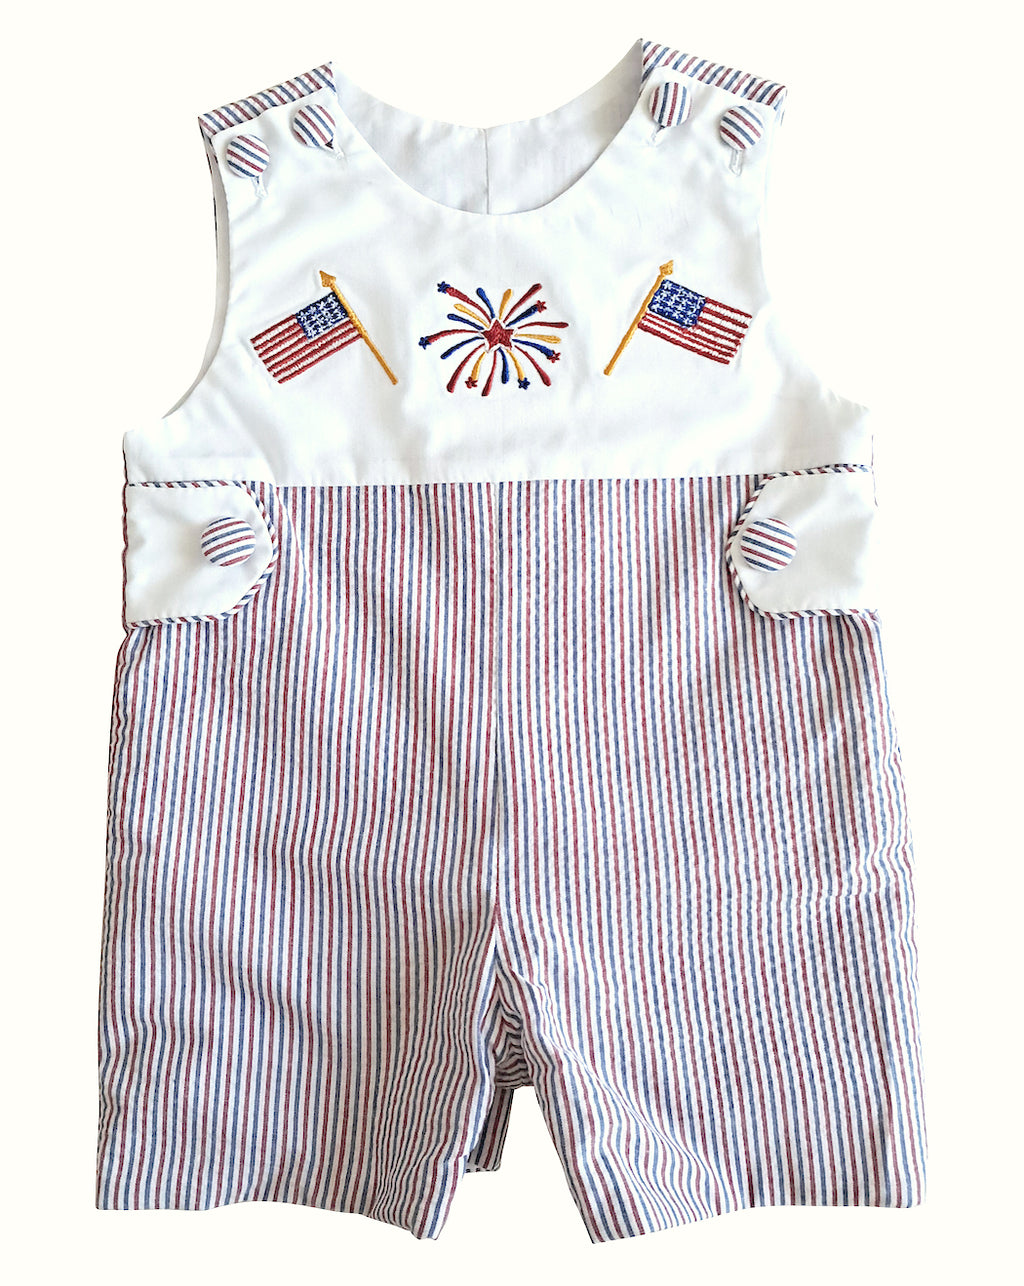 Baby Boy's "Americana Print" Overall - Little Threads Inc. Children's Clothing